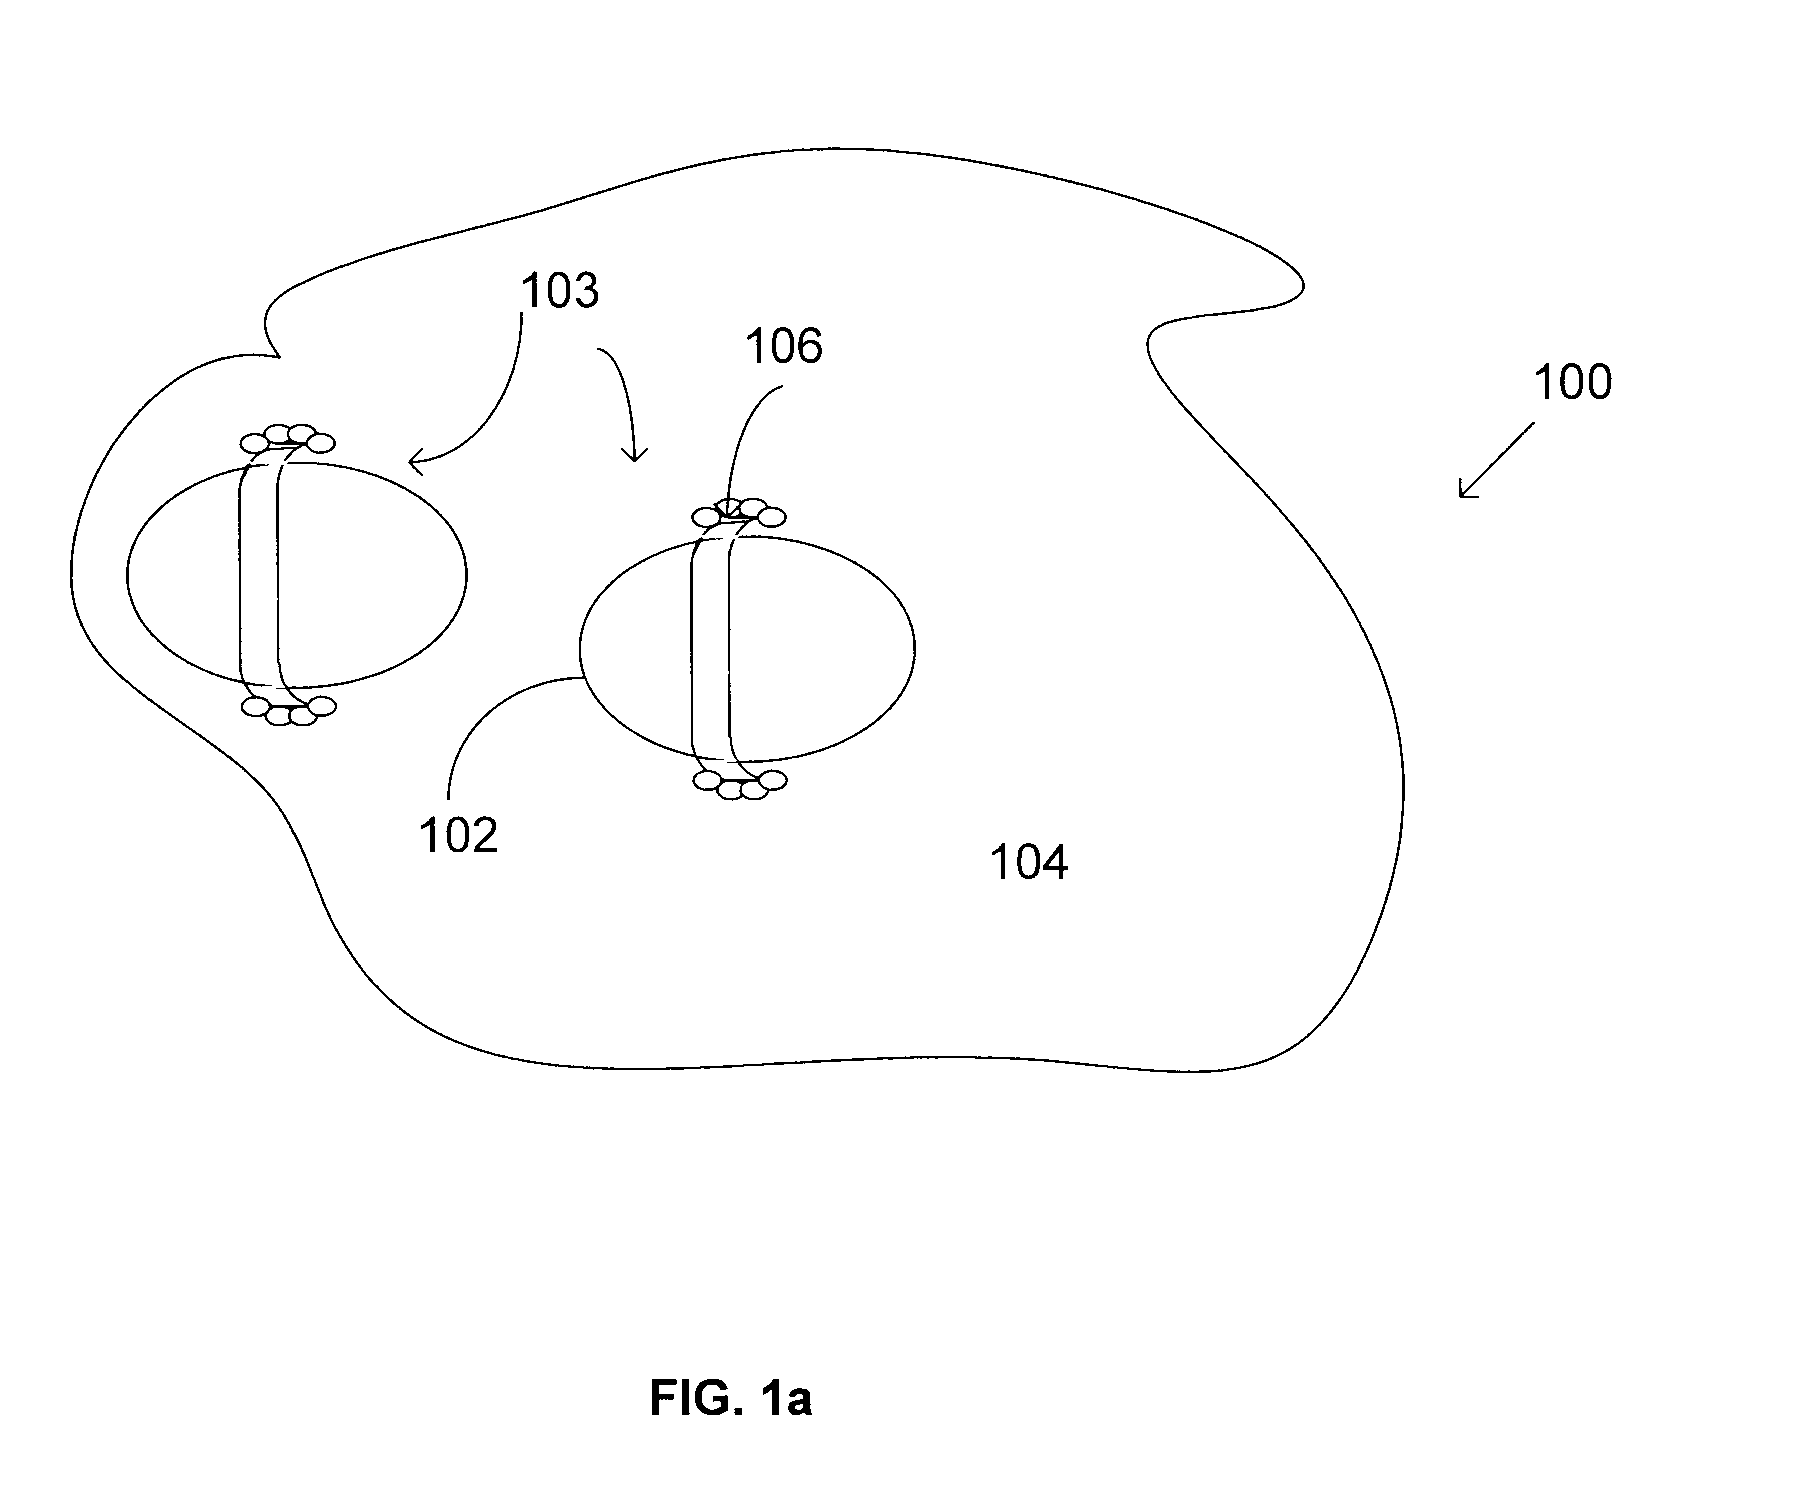 Methods of forming nano-coatings for improved adhesion between first level interconnects and epoxy under-fills in microelectronic packages and structures formed thereby